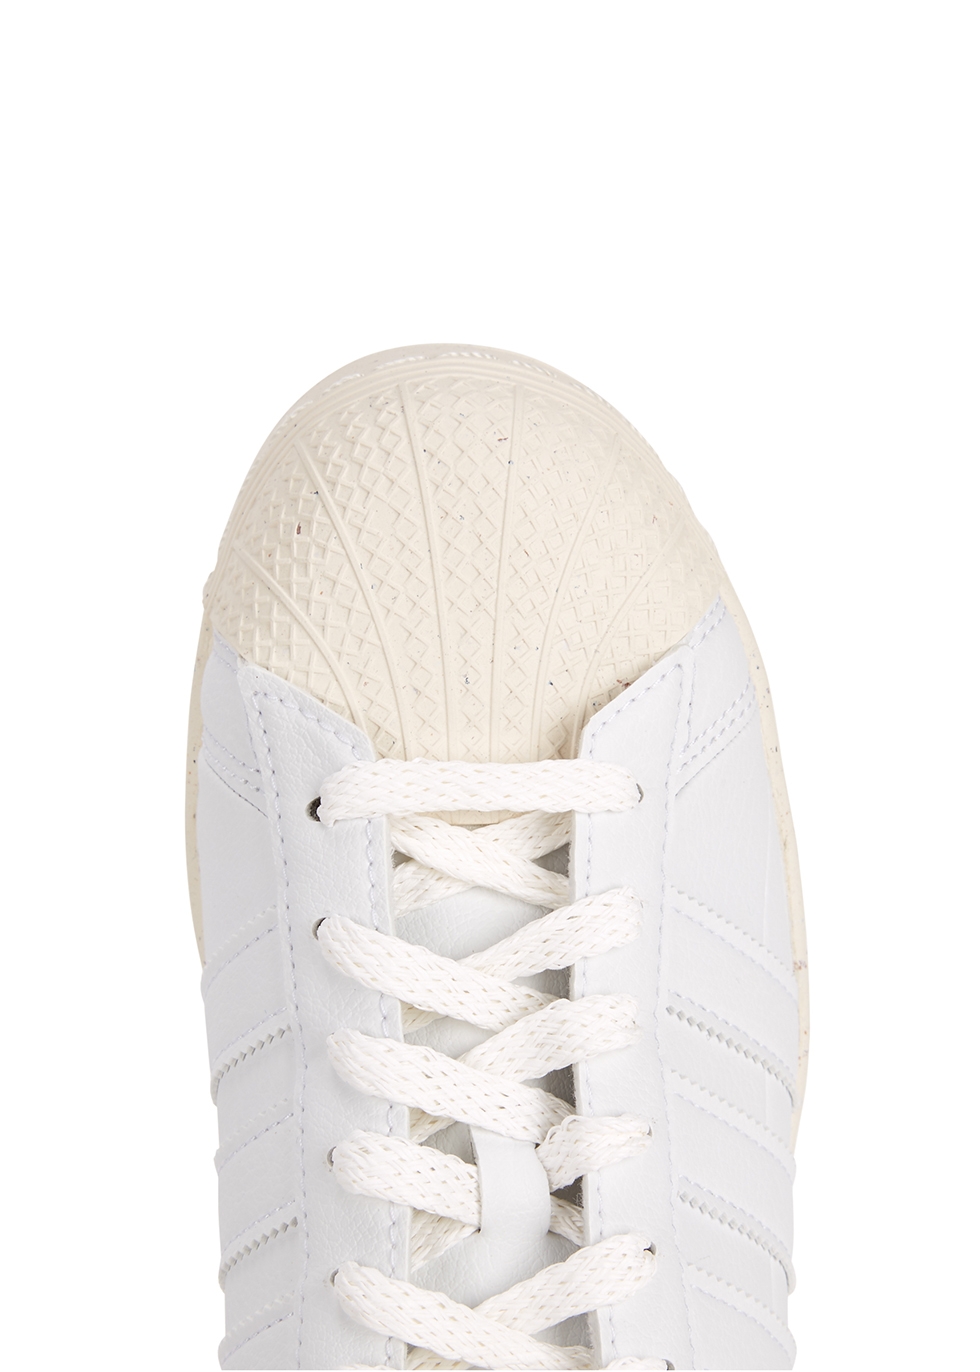 adidas superstar synthetic leather